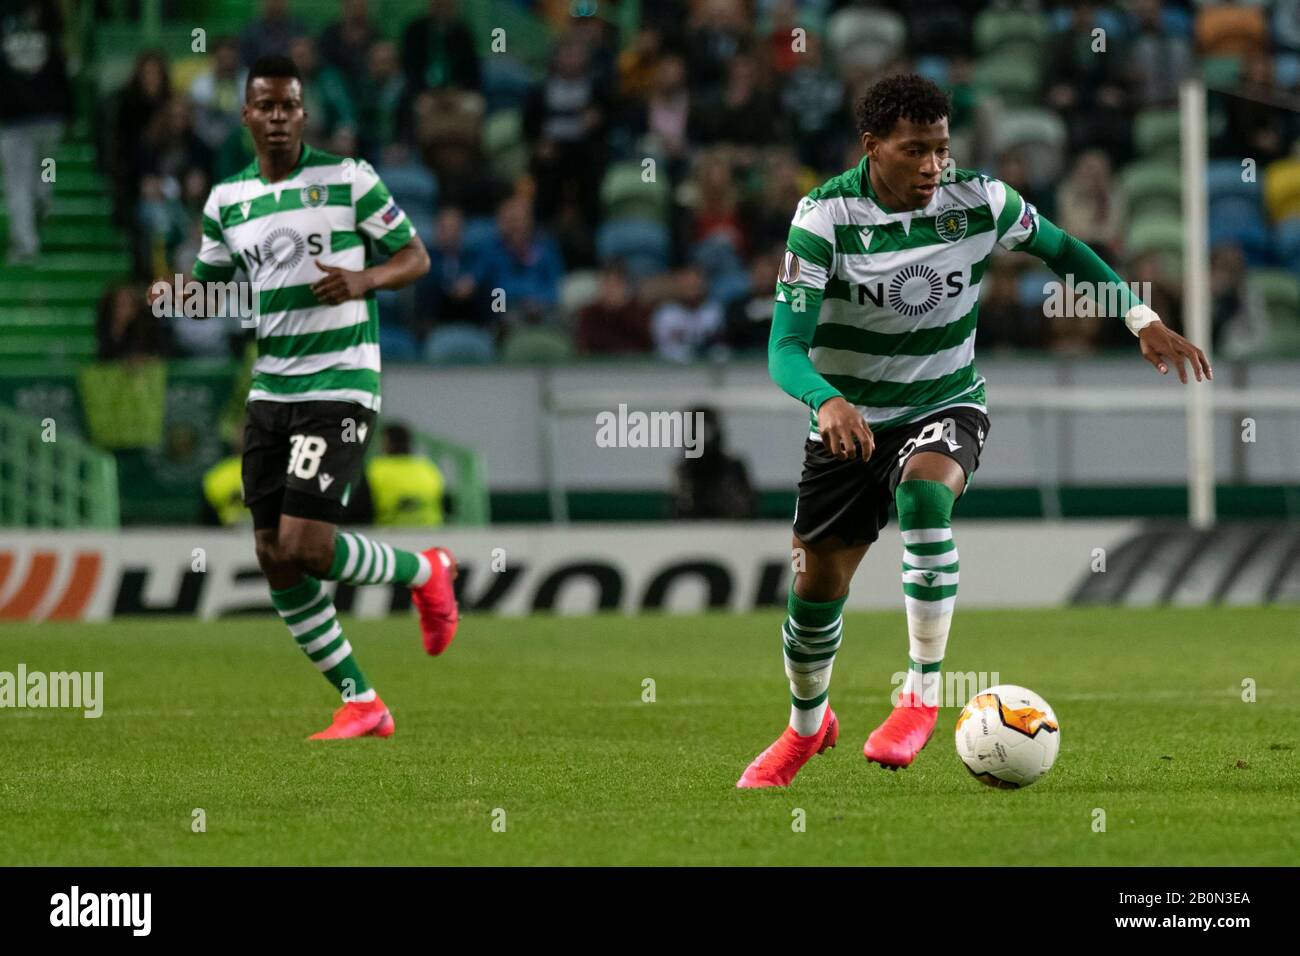 Sporting CP Gonzalo Plata (R) in action during the UEFA Europa League Match 2019/20, Sporting CP vs Istanbul Ba?ak?ehir FK at José Alvalade Stadium.(Final Score: Sporting CP 3 -1 Istanbul Ba?ak?ehir FK) Stock Photo